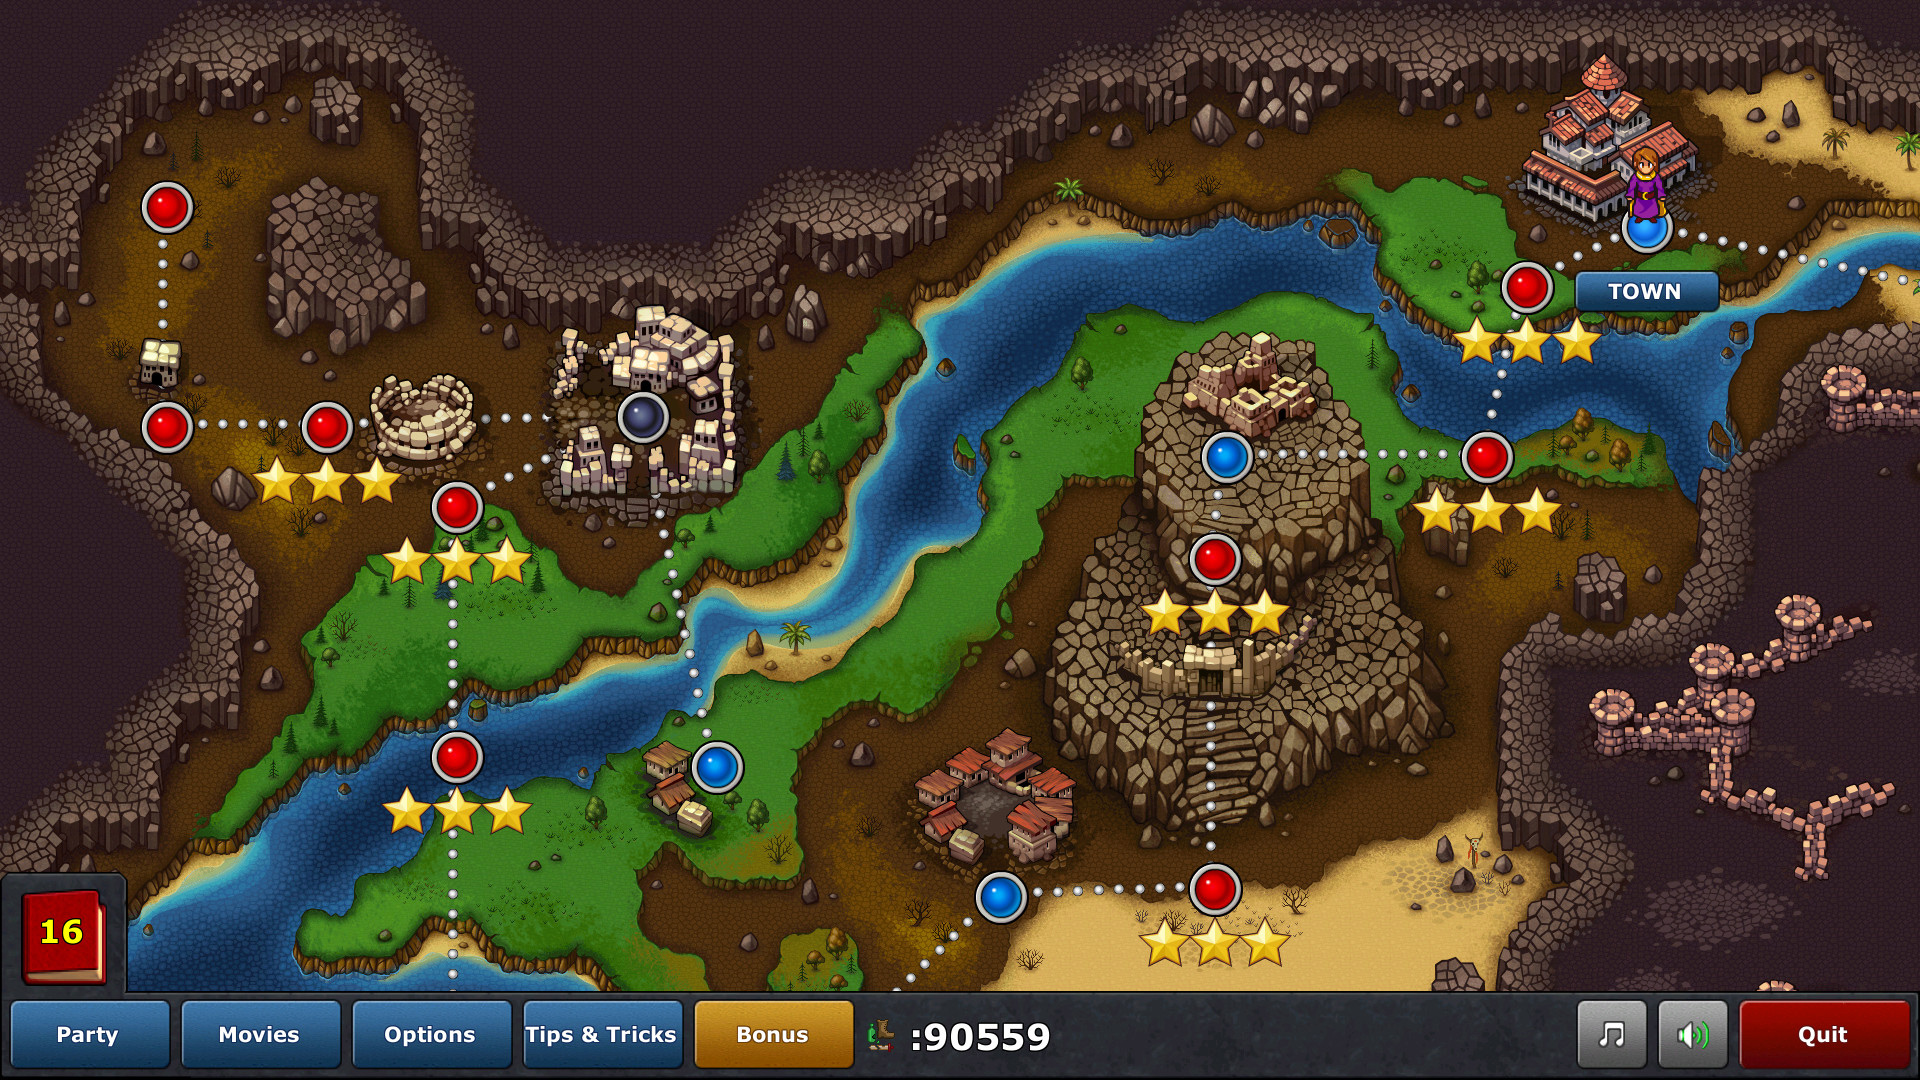 Defender's Quest: Valley of the Forgotten Review – Gamezebo